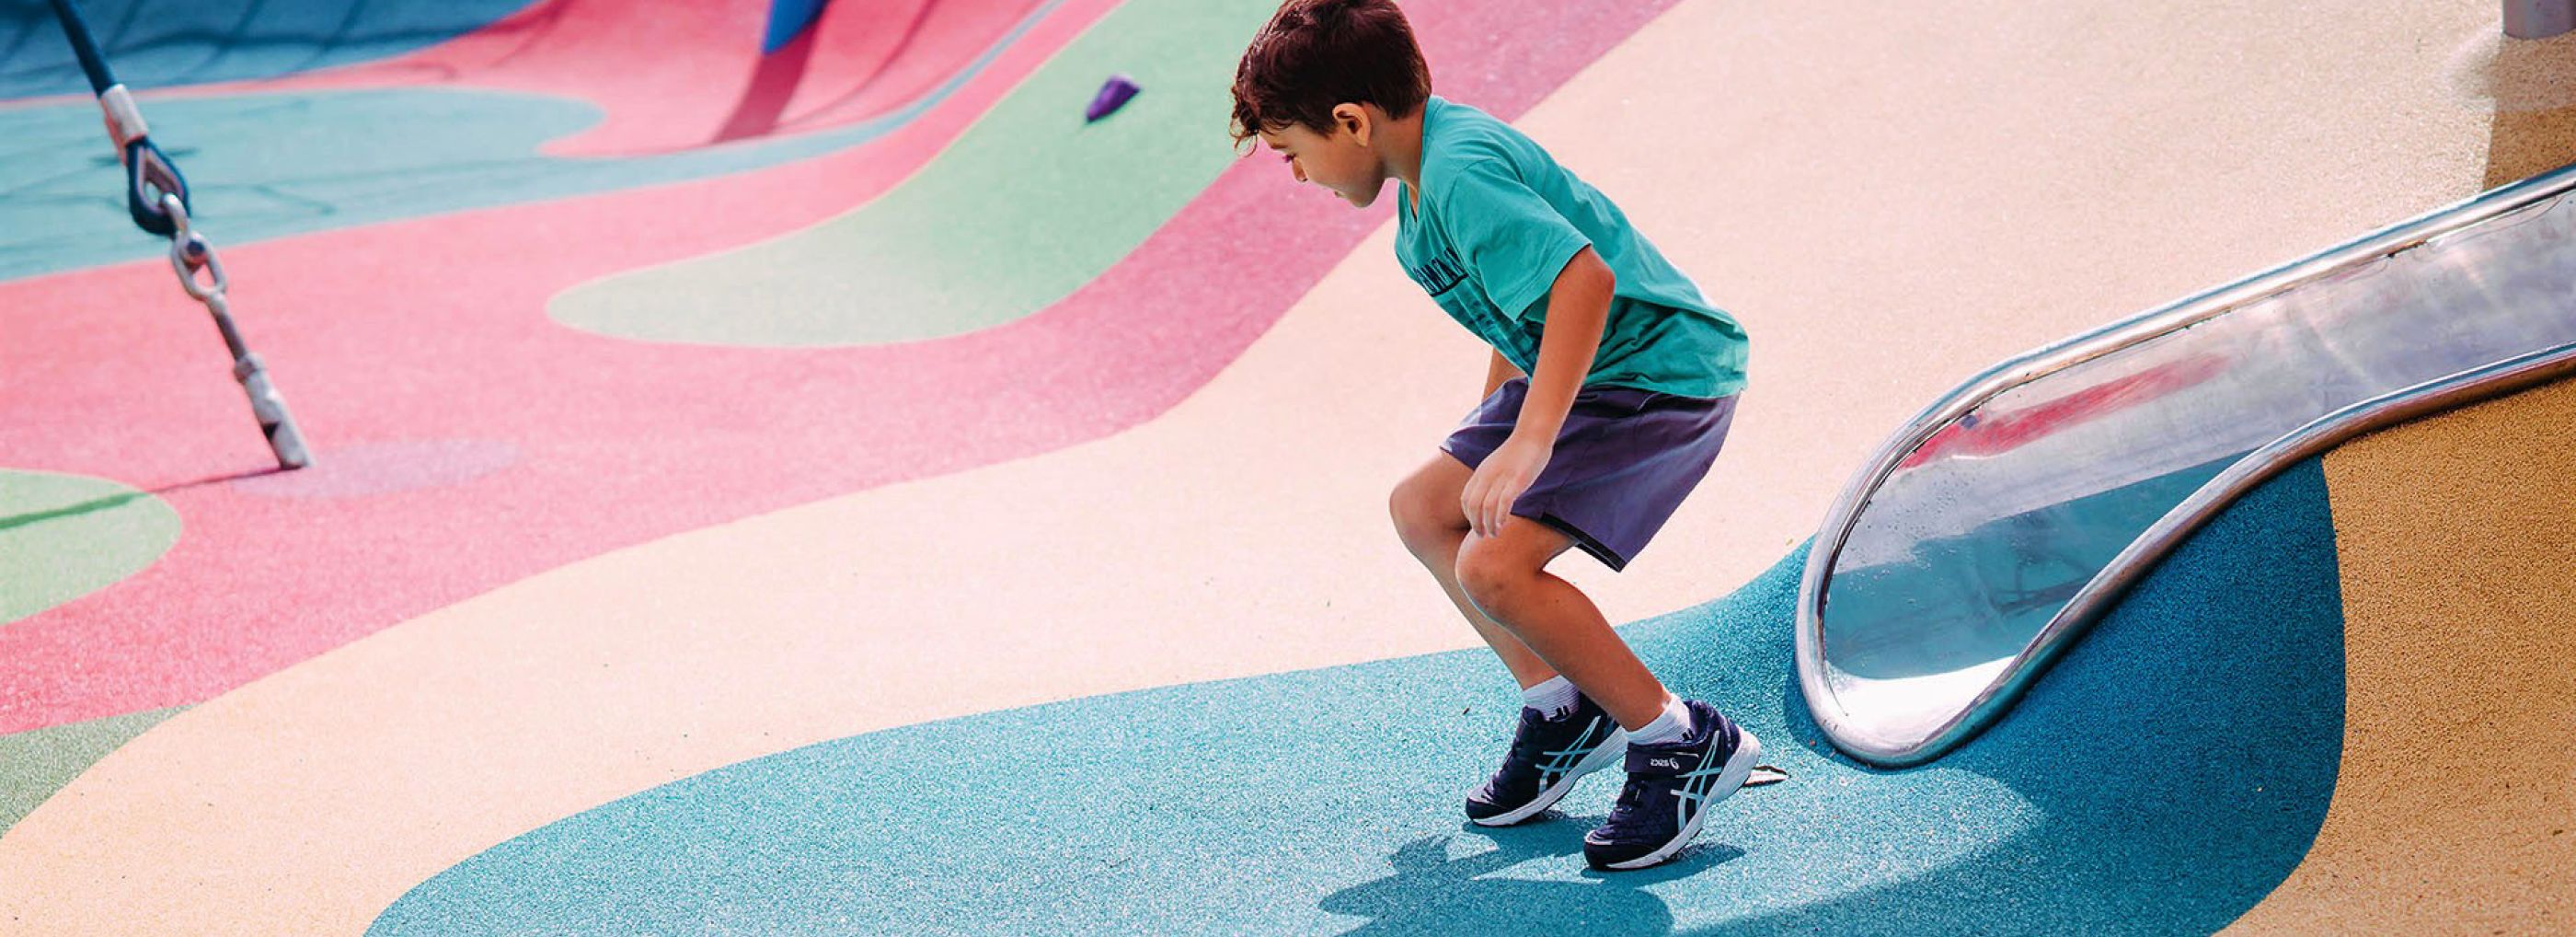 A young boy standing up after going down a slide that has been built into colourful rubber playground flooring.